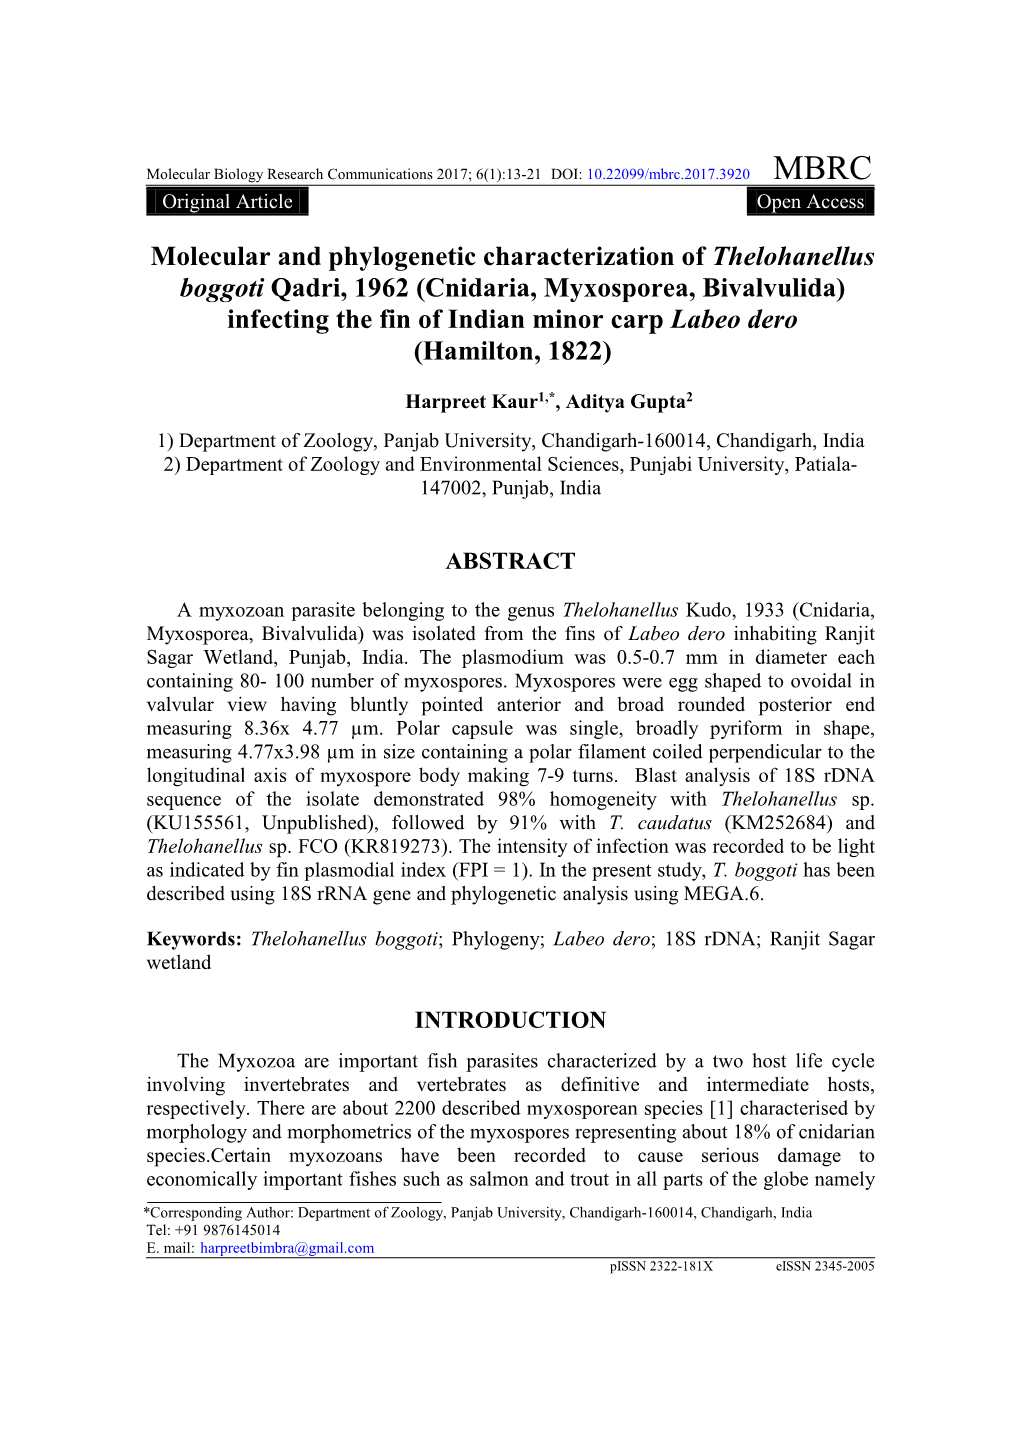 Molecular and Phylogenetic Characterization of Thelohanellus